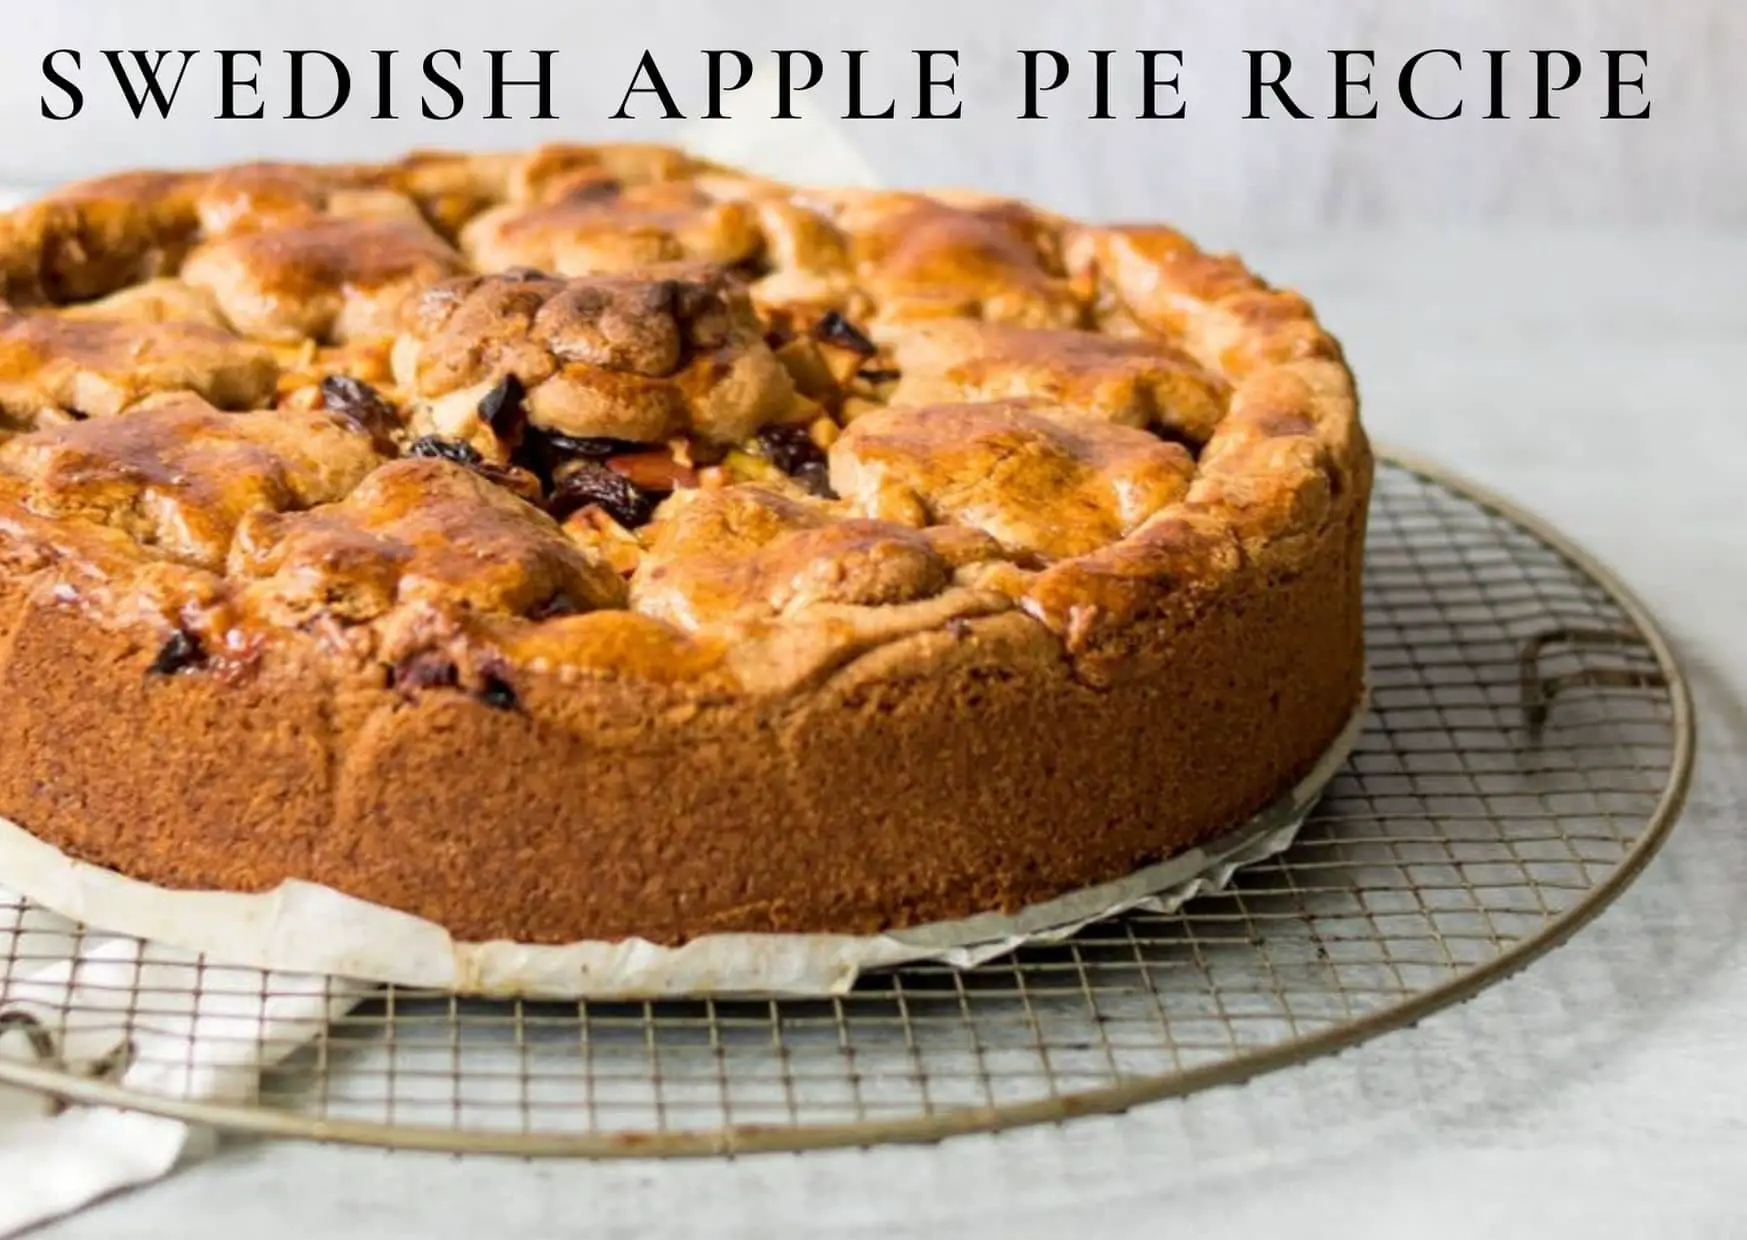 Swedish Apple Pie Recipe: How To Make It In 4 Easy Steps?